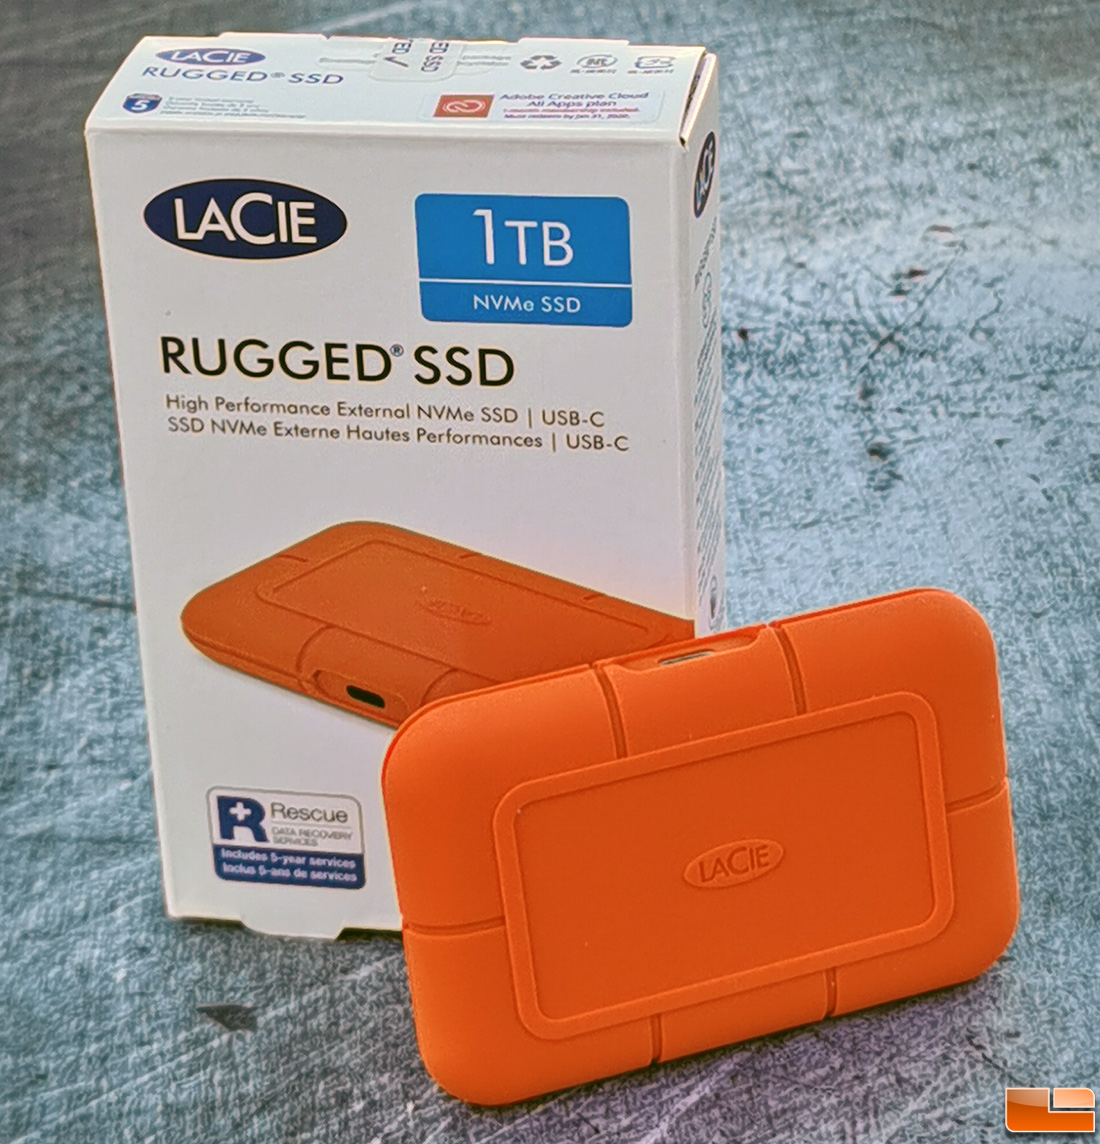 LaCie Rugged Review - 1TB Portable Drive Tested - Page 6 6 - Legit Reviews